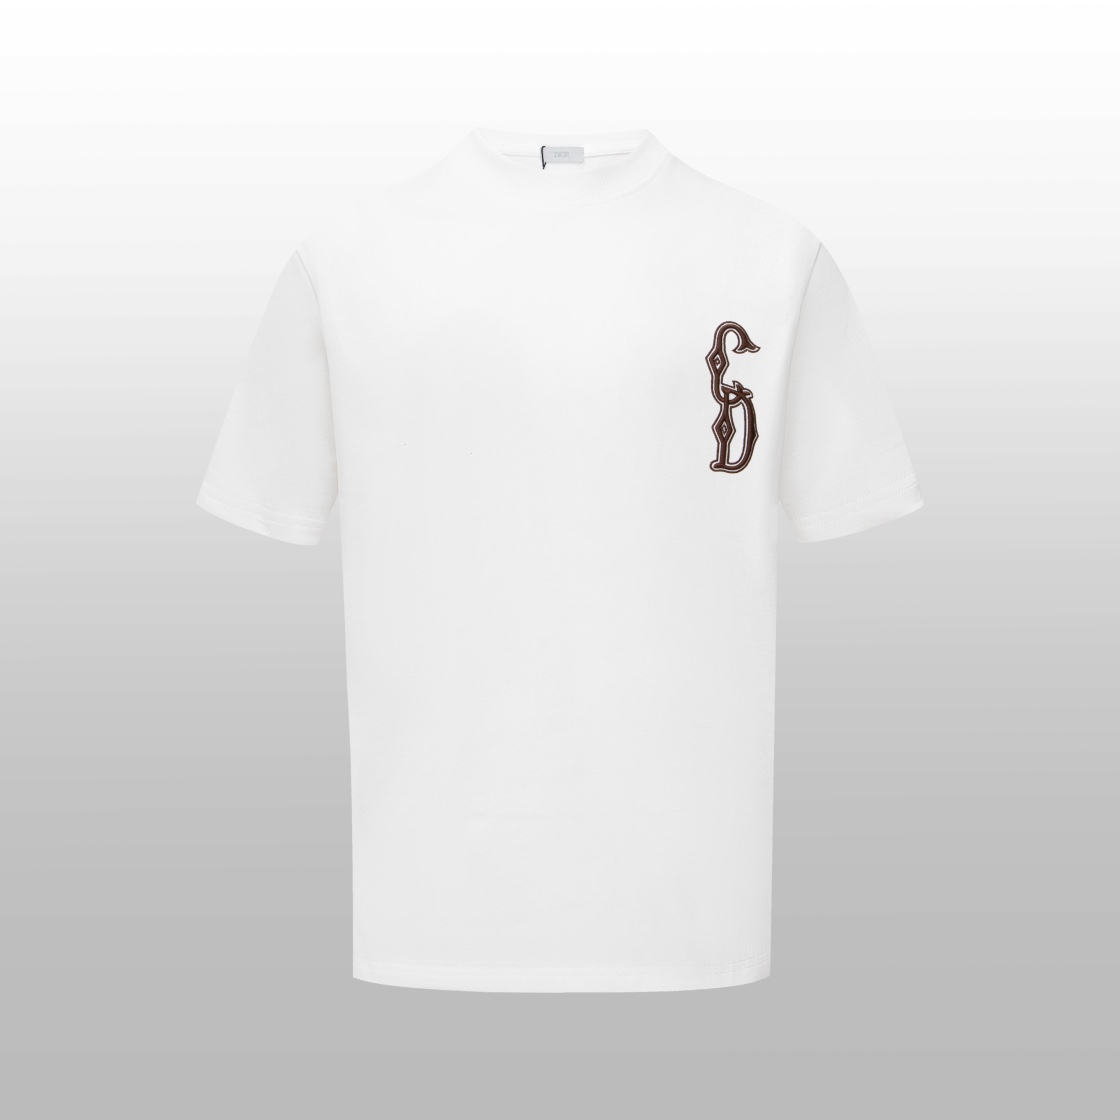 Dior New
 Clothing T-Shirt Best Replica 1:1
 White Embroidery Unisex Short Sleeve